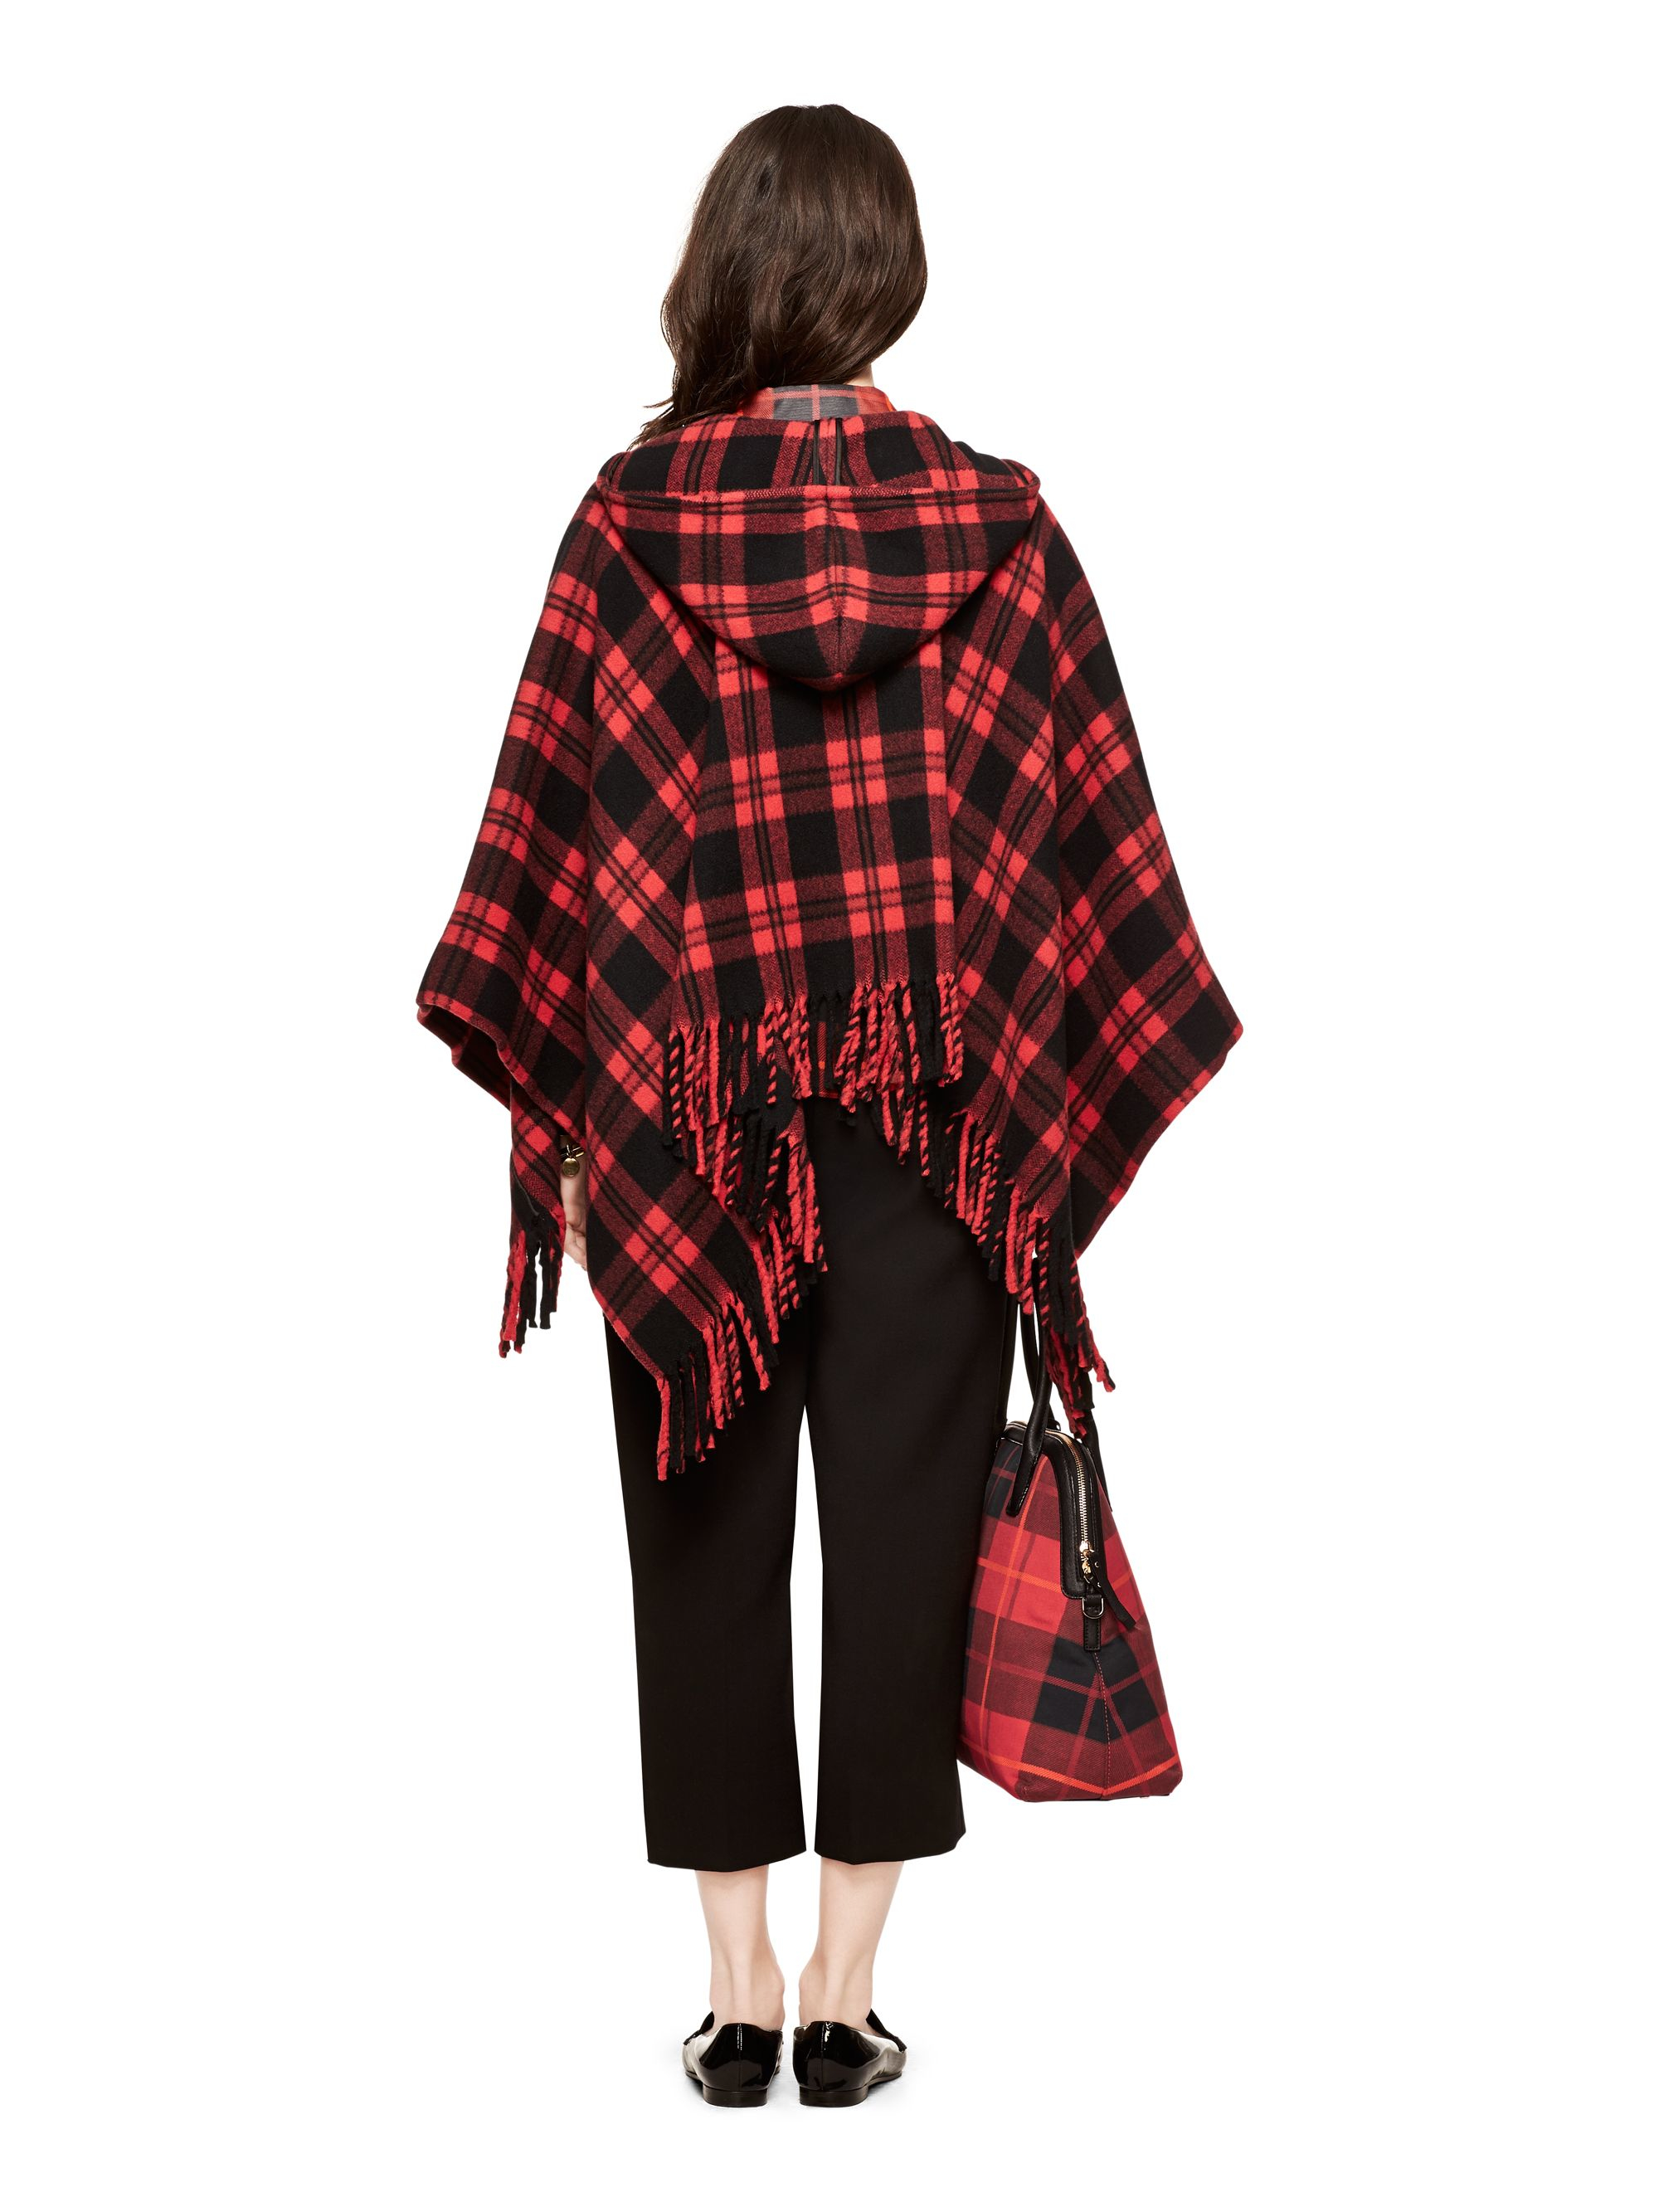 Lyst - Kate Spade New York Plaid Poncho in Red